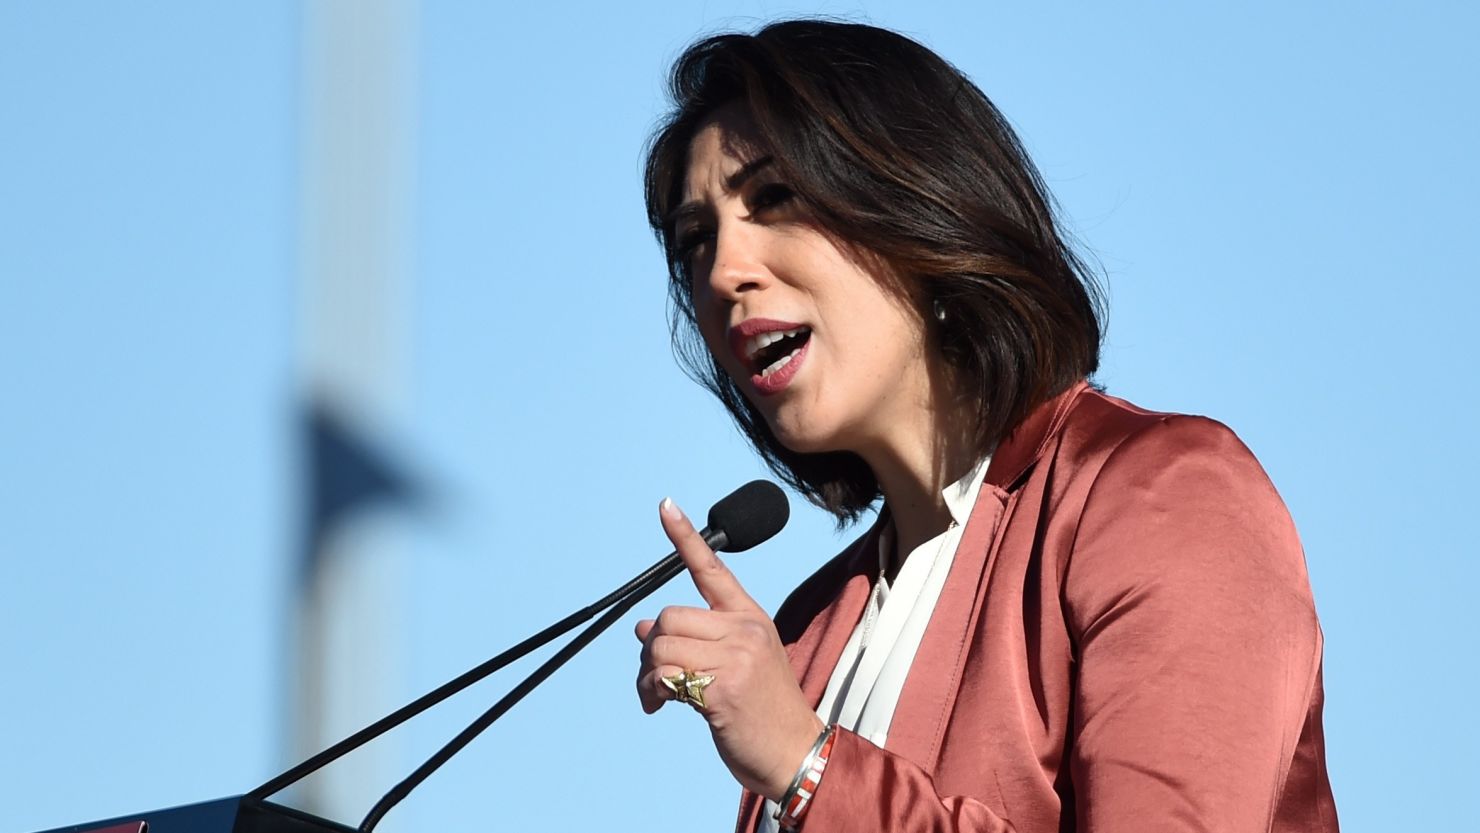 Idaho State Rep. Paulette Jordan wants to make the leap to the governor's mansion.